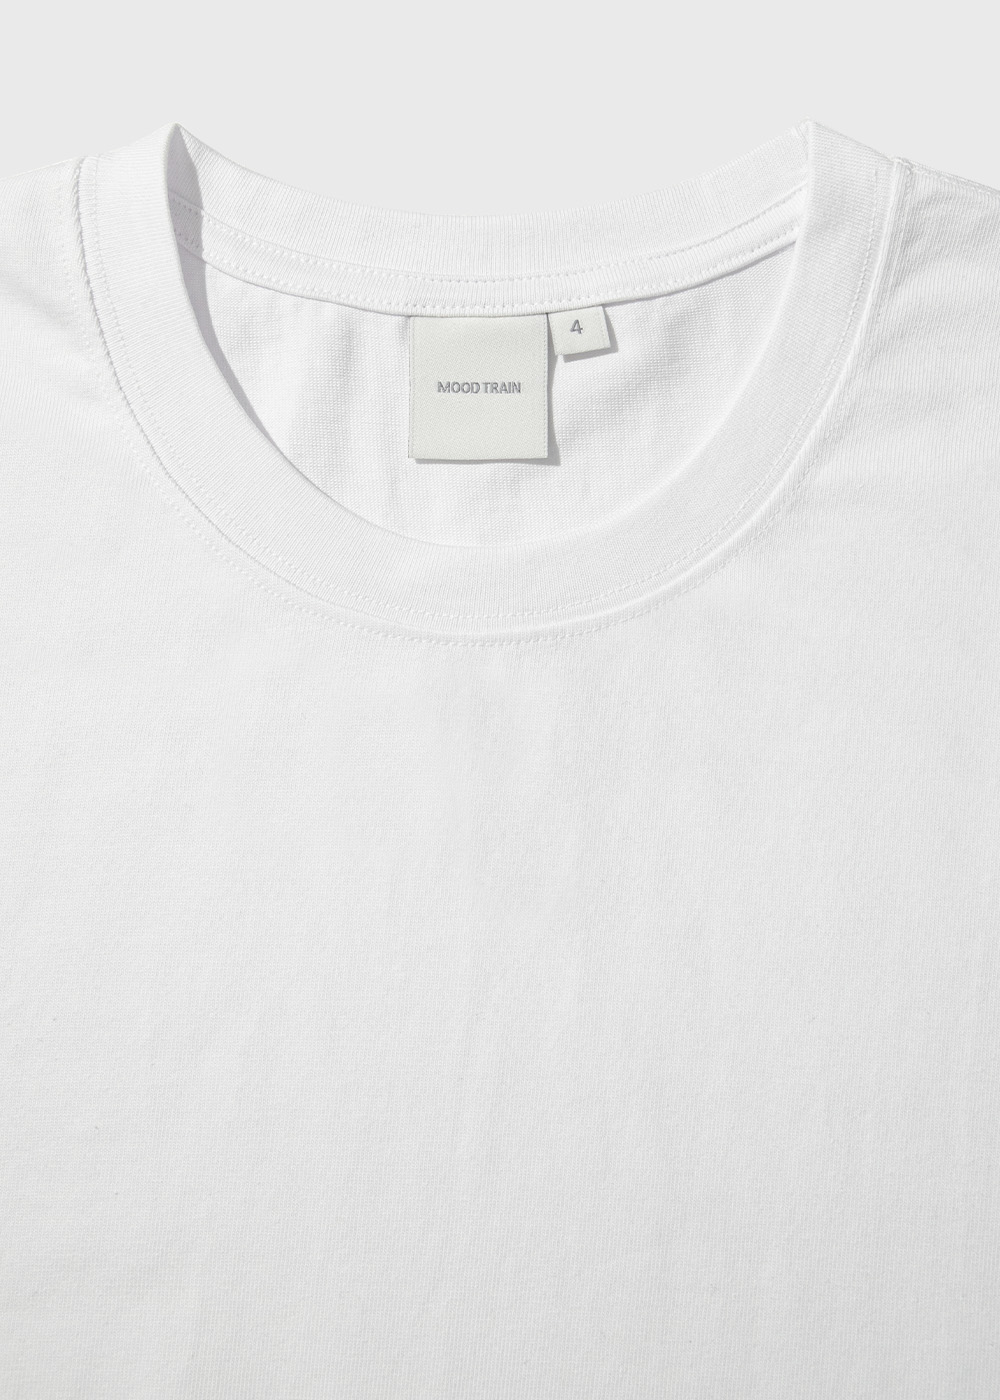 G. Heavy Enzymed Combed Cotton-Polyester Blended 12/1 Single T-shirt _ white